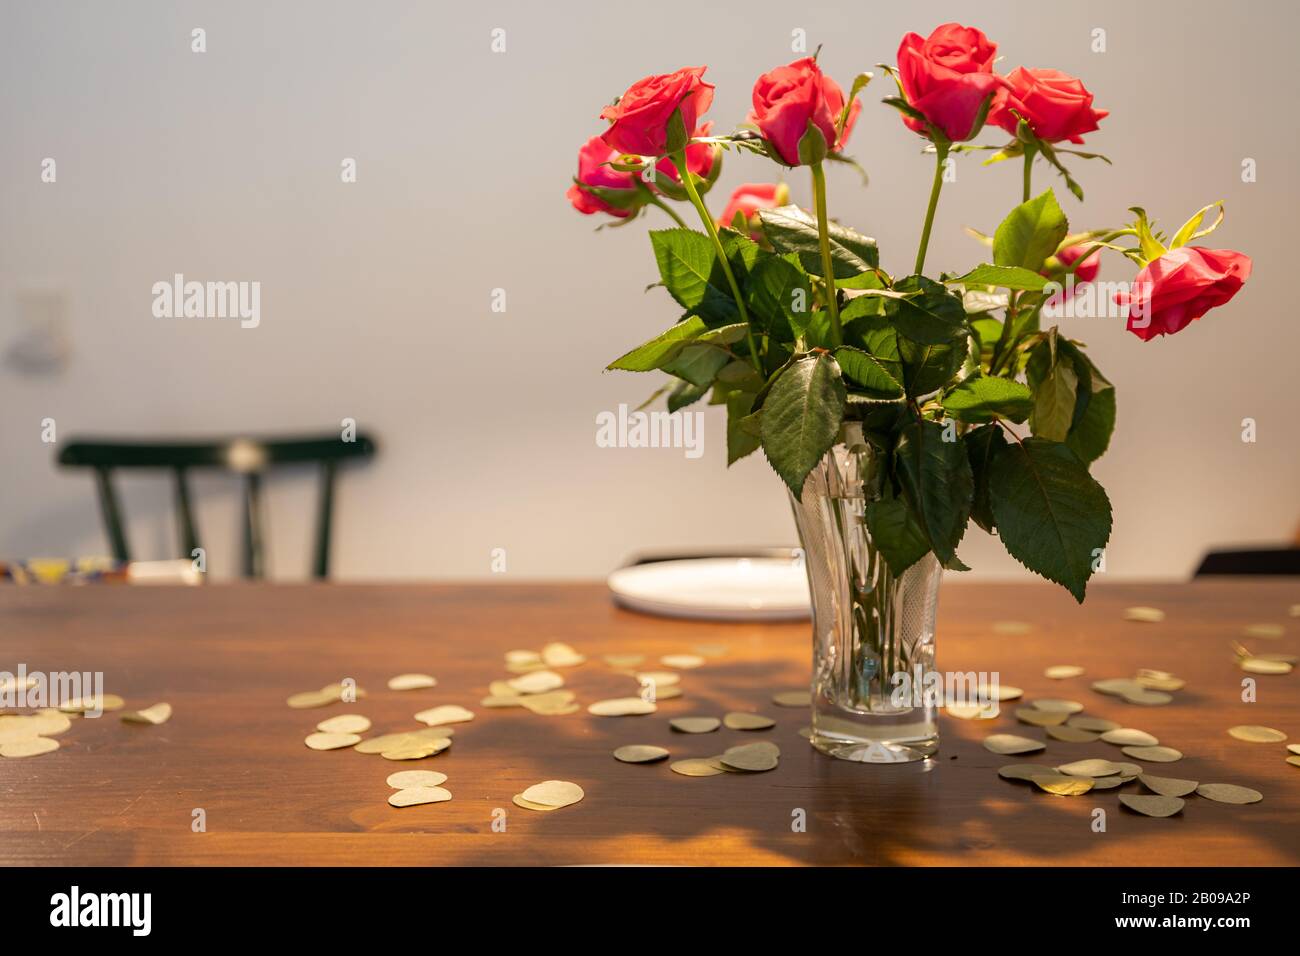 Vase with red roses on a table with gold confetti. Stock Photo